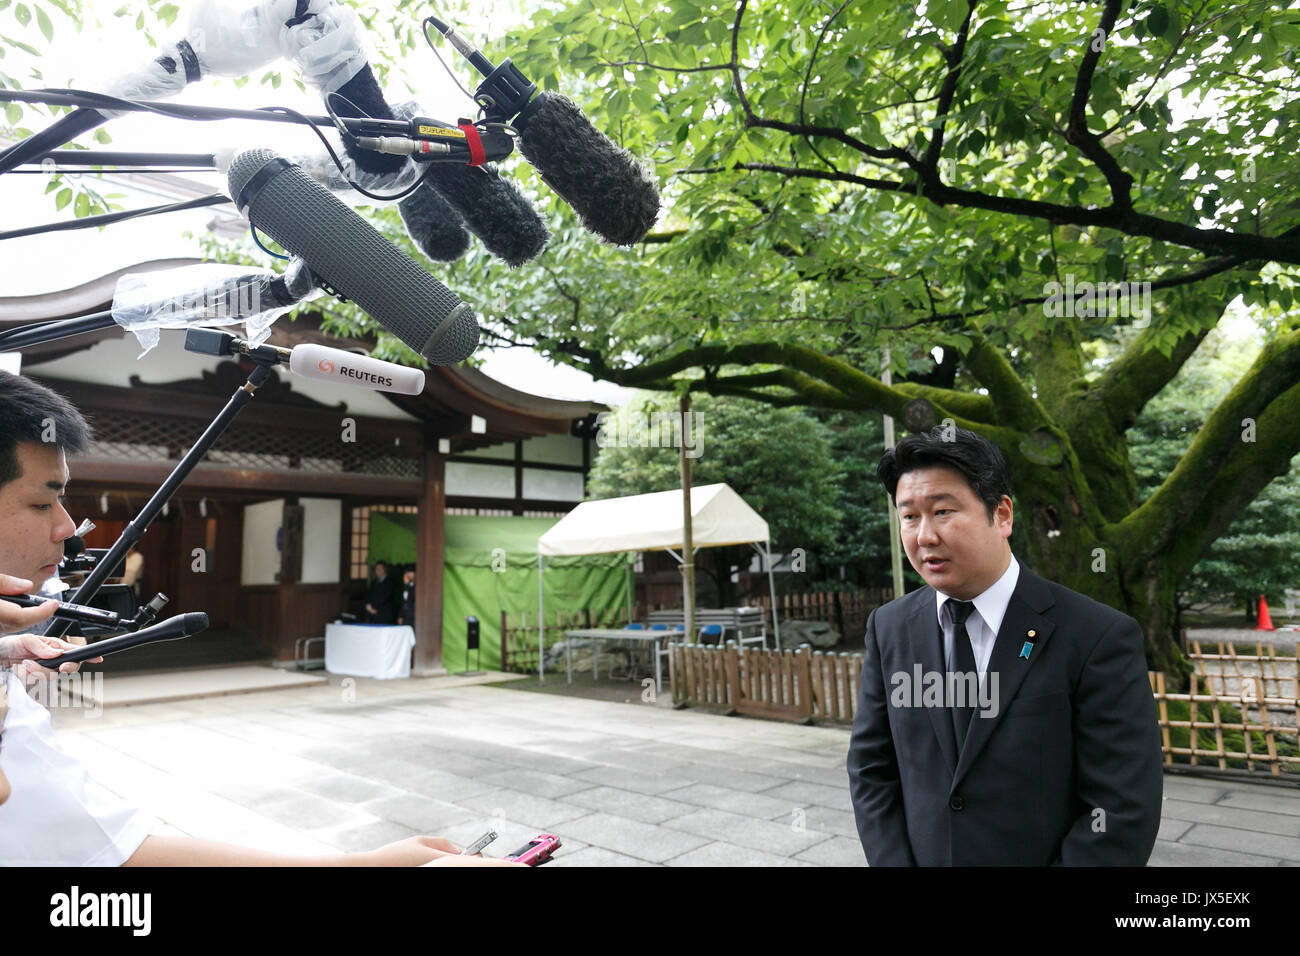 Tokyo, Japan. 15th Aug, 2017. Japanese politician Masamune Wada answers questions from the press at Yasukuni Shrine on the 72nd anniversary of Japan's surrender in World War II on August 15, 2017, Tokyo, Japan. Prime Minister Shinzo Abe was not among the lawmakers to visit the Shrine and instead sent a ritual offering to avoid angering neighboring countries who also associate Yasukuni with war criminals and Japan's imperial past. Credit: Rodrigo Reyes Marin/AFLO/Alamy Live News Stock Photo